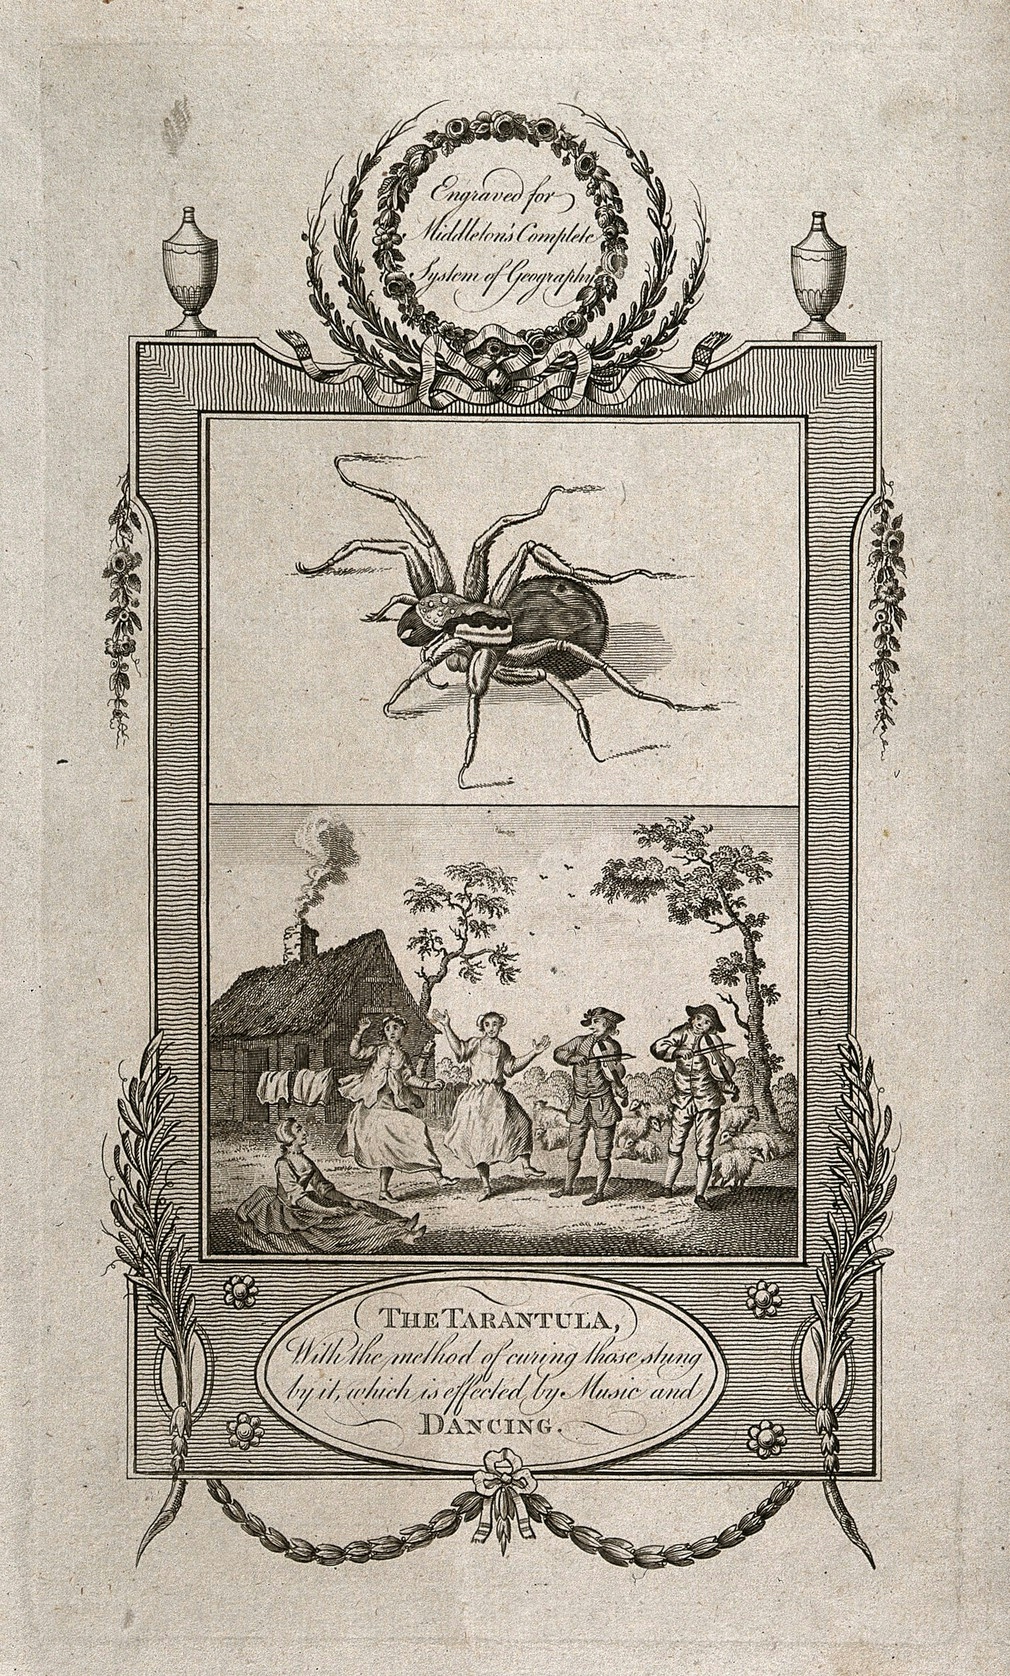 Etching of rectangular border with one image of a spider above and an image of men and women dancing and playing music below.